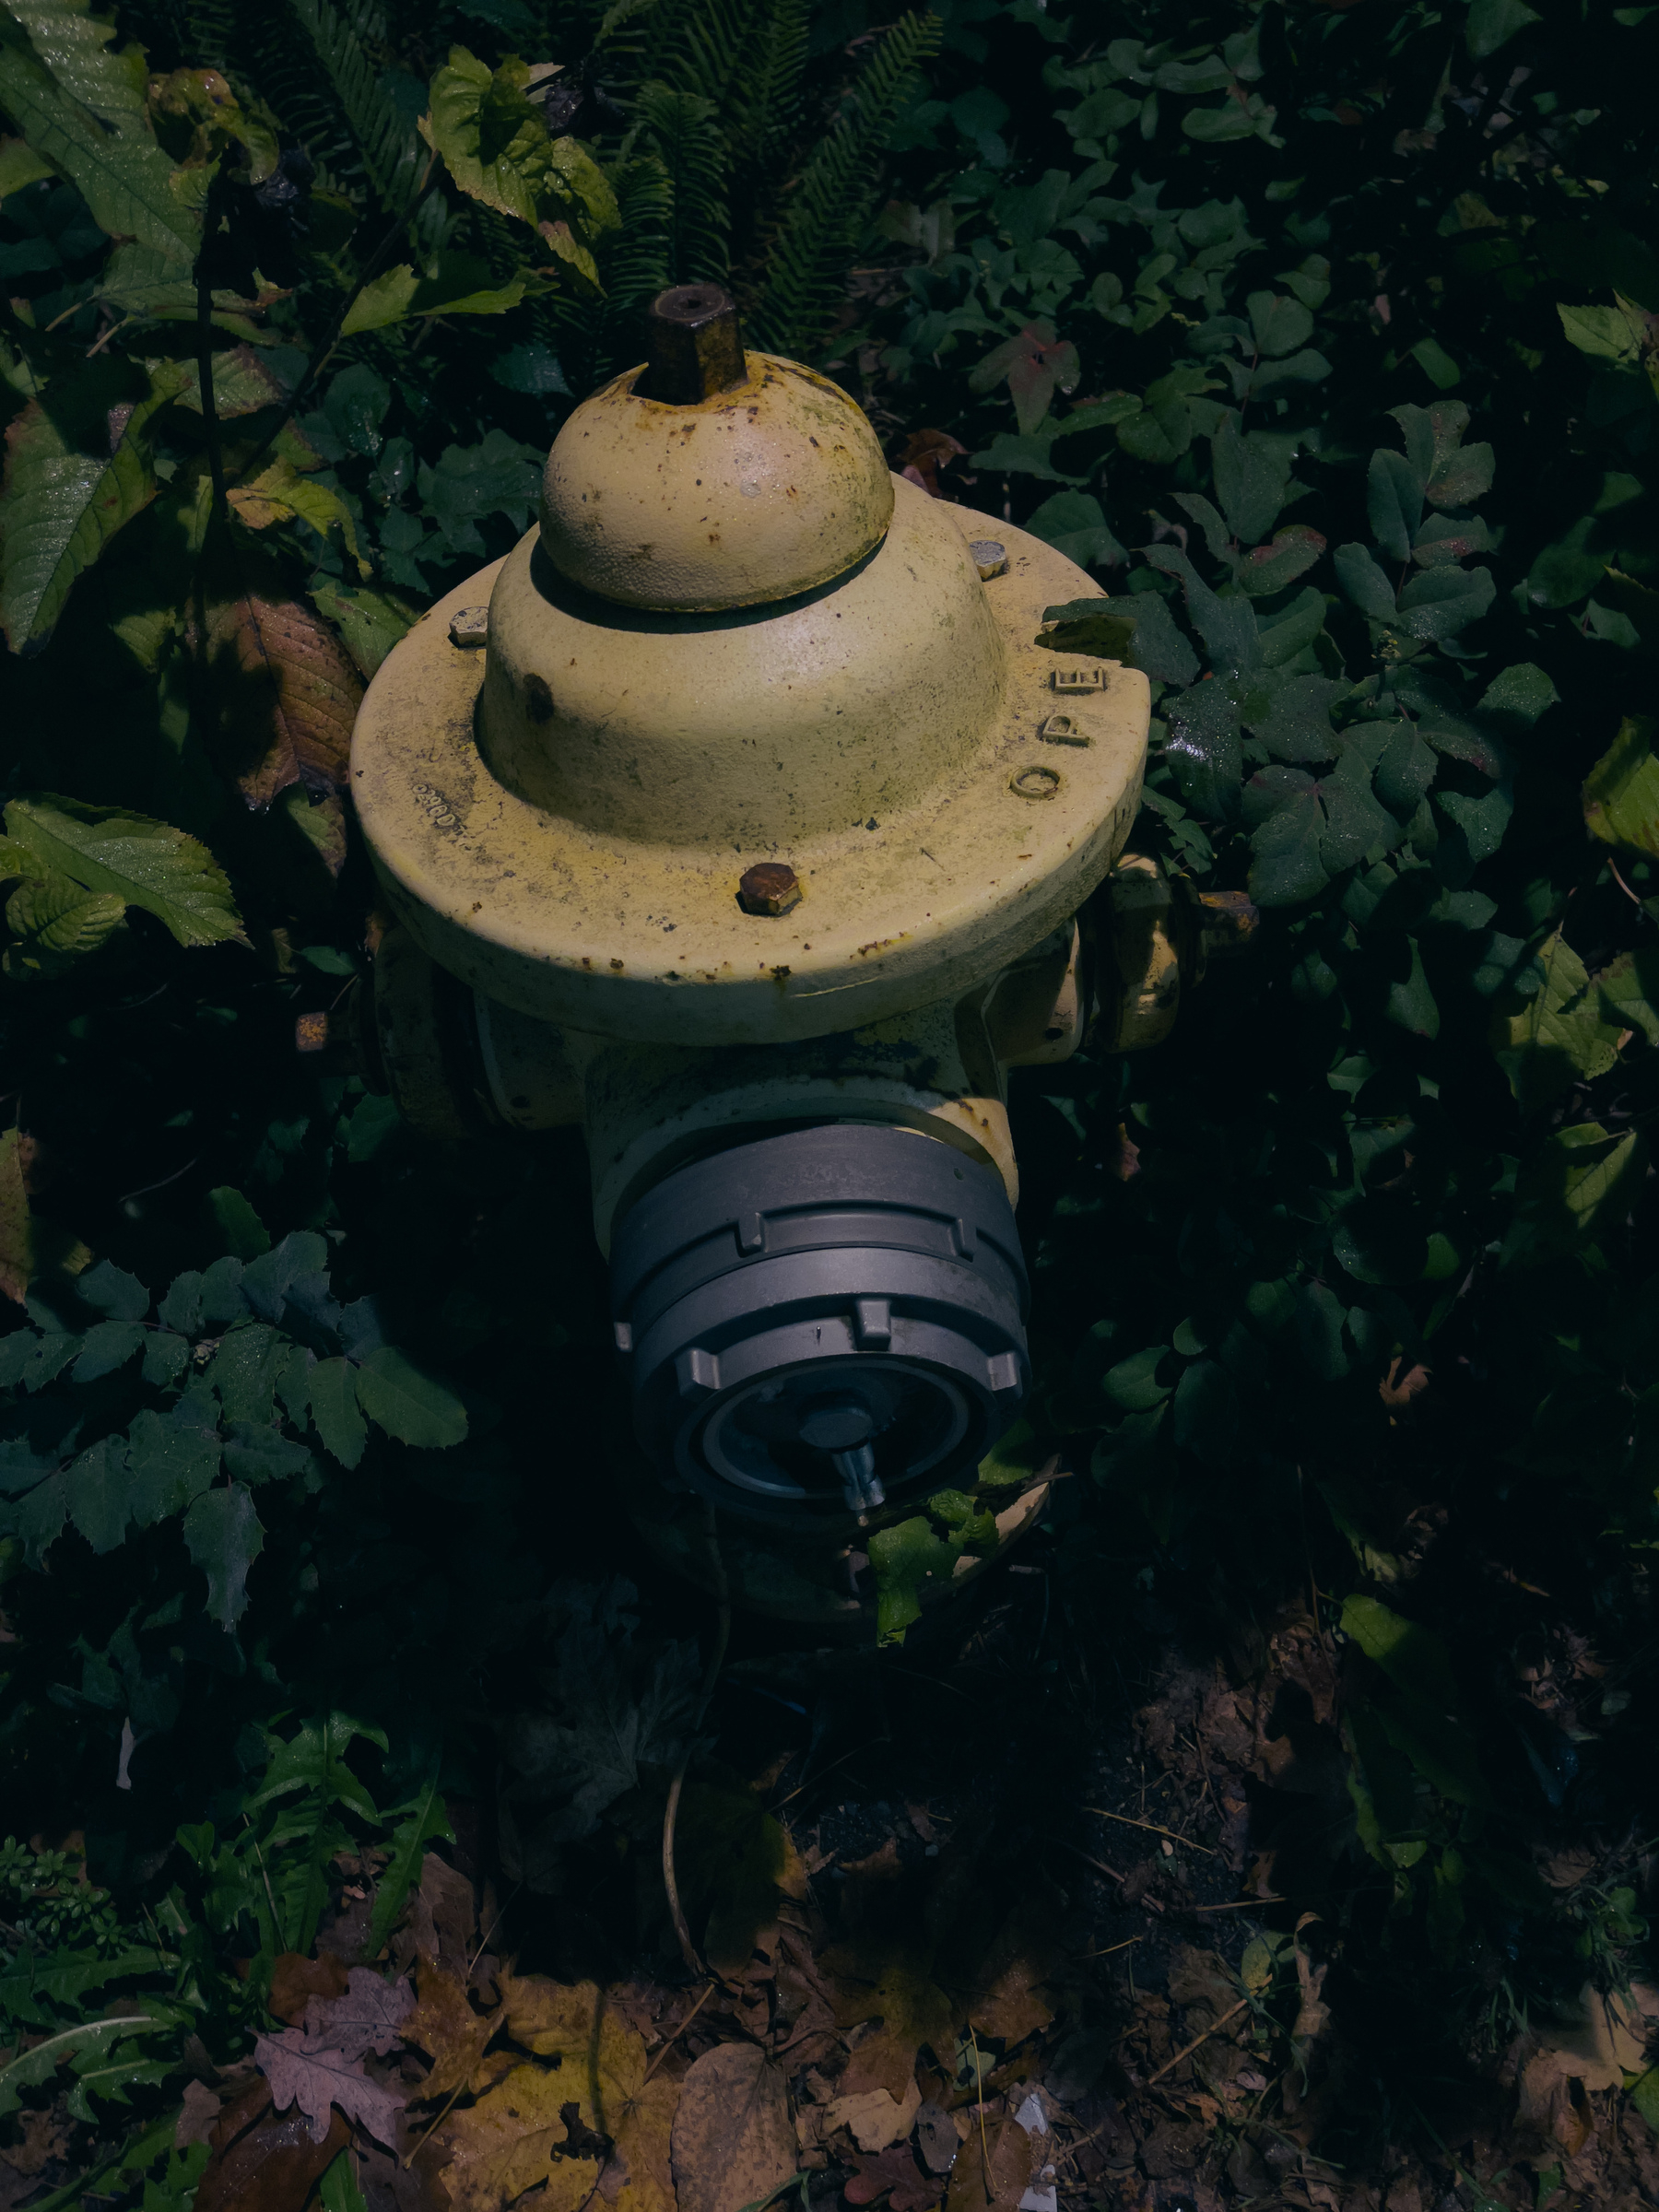 Fire hydrant in the midst of weeds, lit by streetlights.